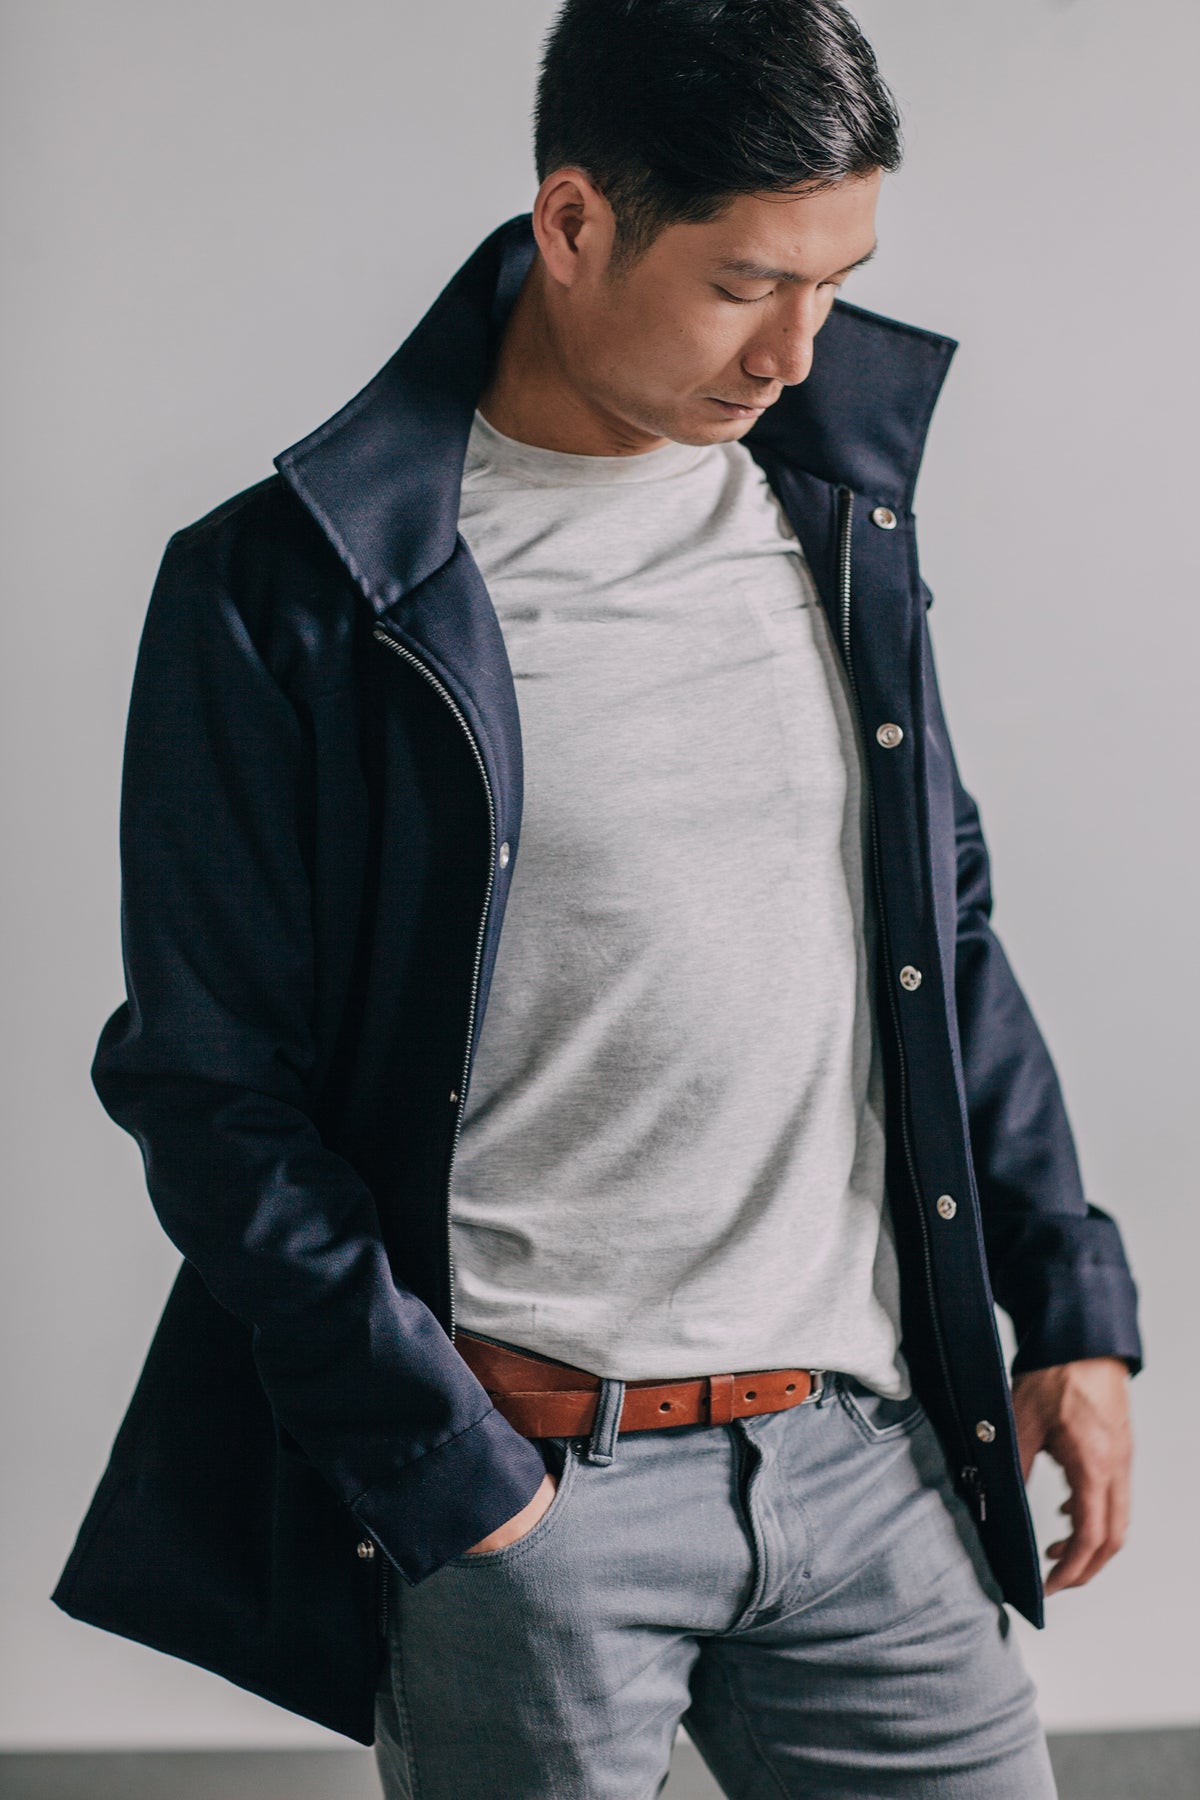 The Stowaway Jacket - Anywhere Apparel